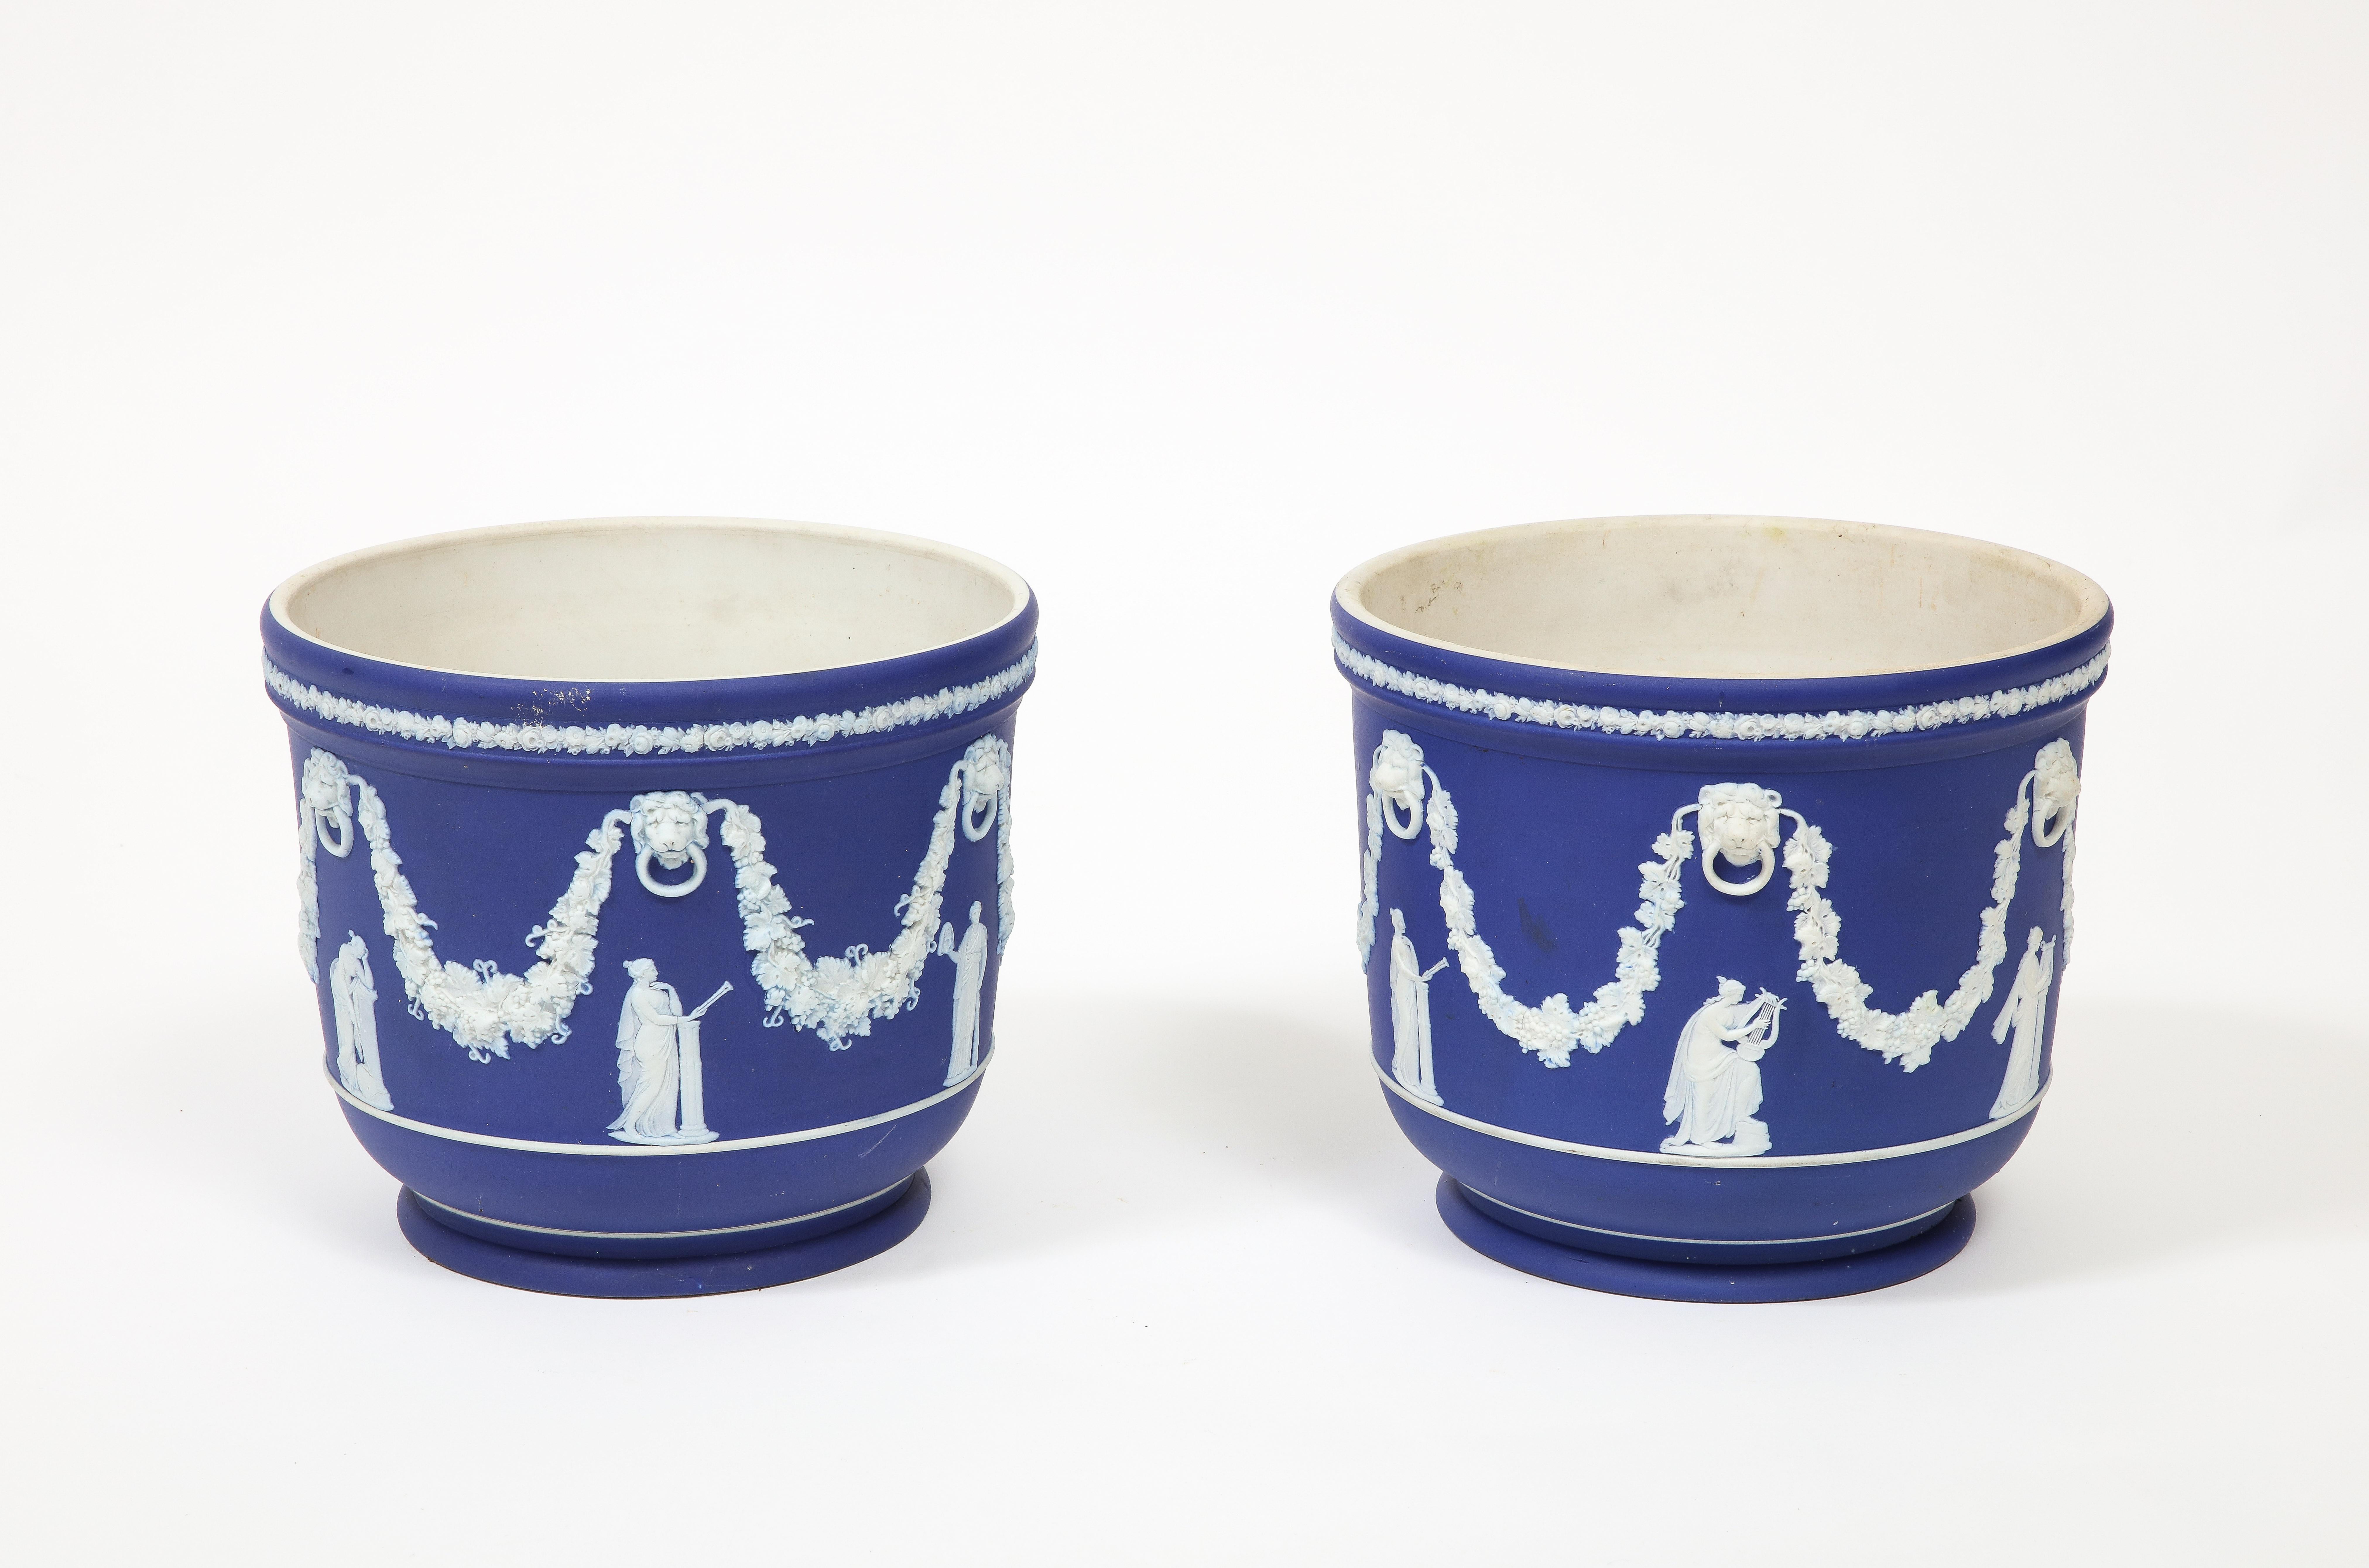 Pair of early 20th Century antique cobalt Wedgwood Jasperware planters, featuring classical figures beneath lion's heads and garlands of grapes. Along the top edge is a band of fruits and flowers. The interior is white porcelain. 